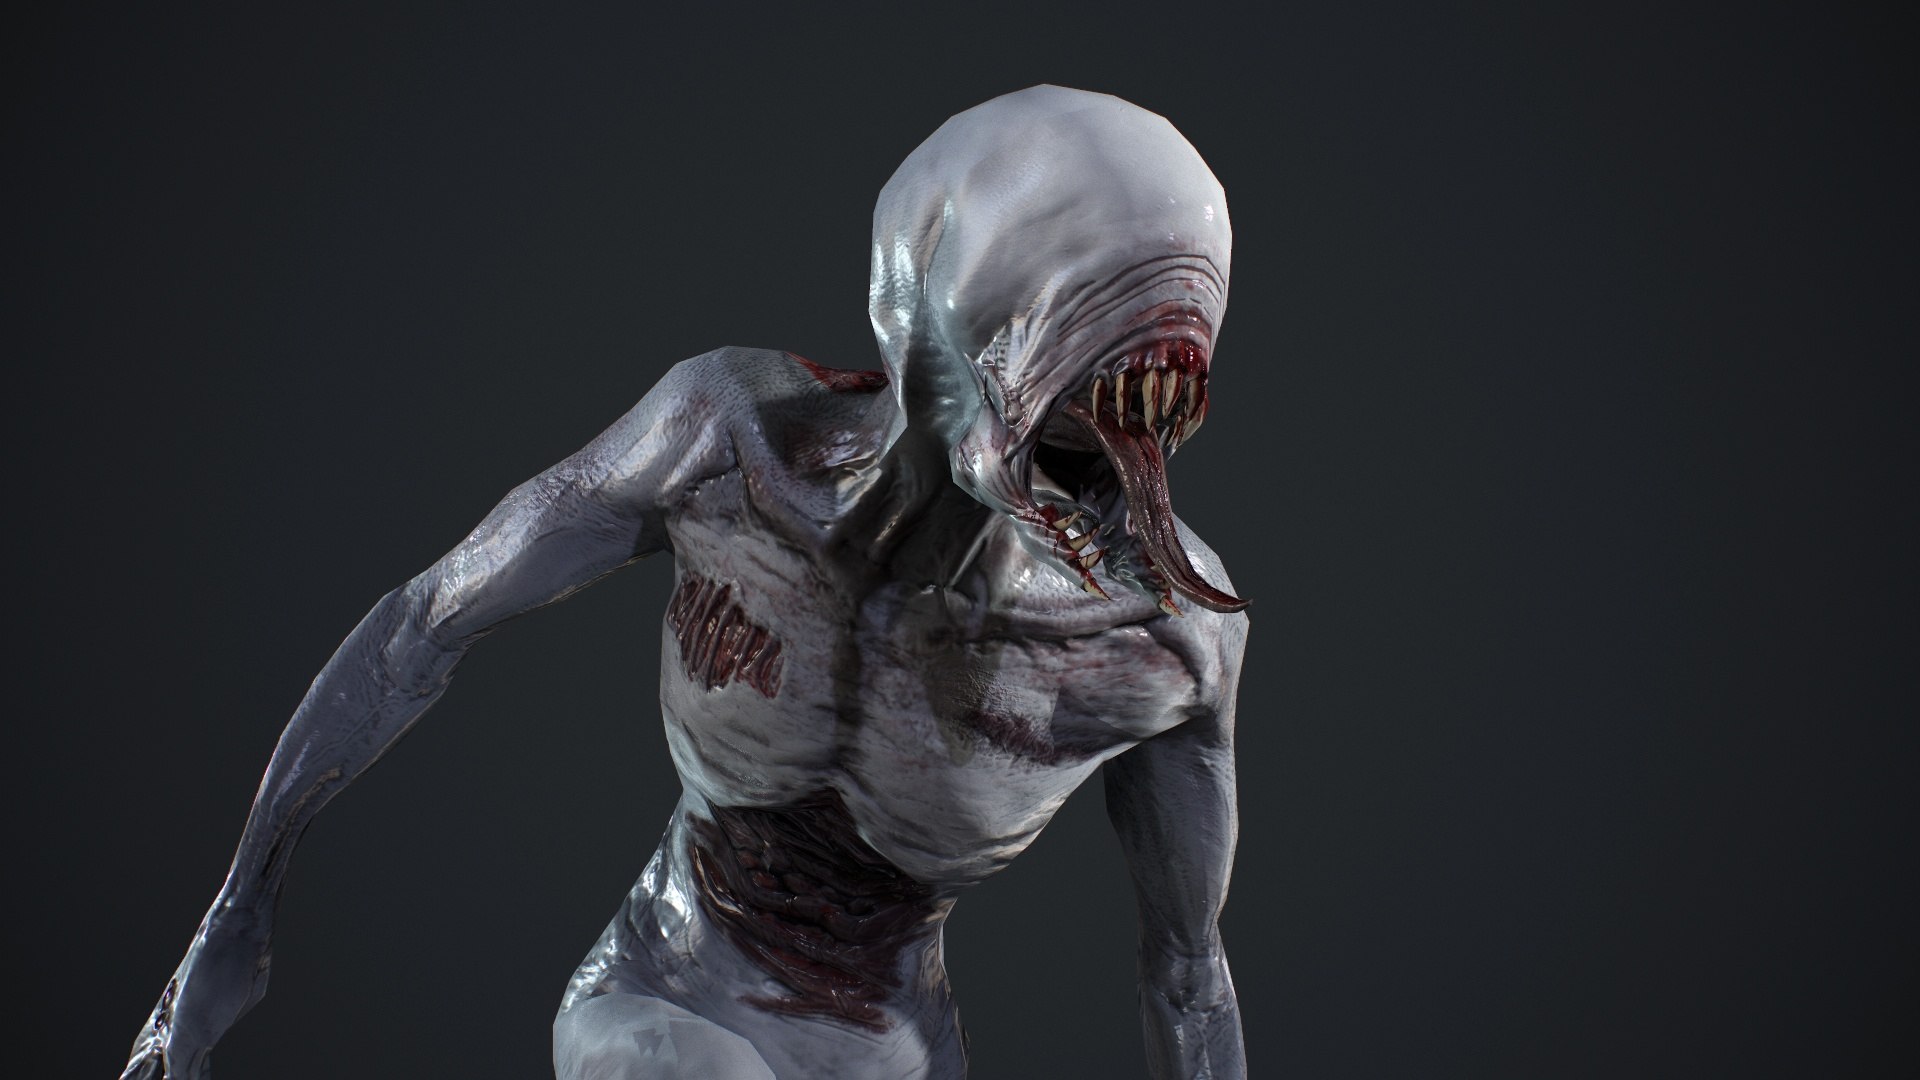 SCP-3000 - A 3D model collection by SymeonV - Sketchfab